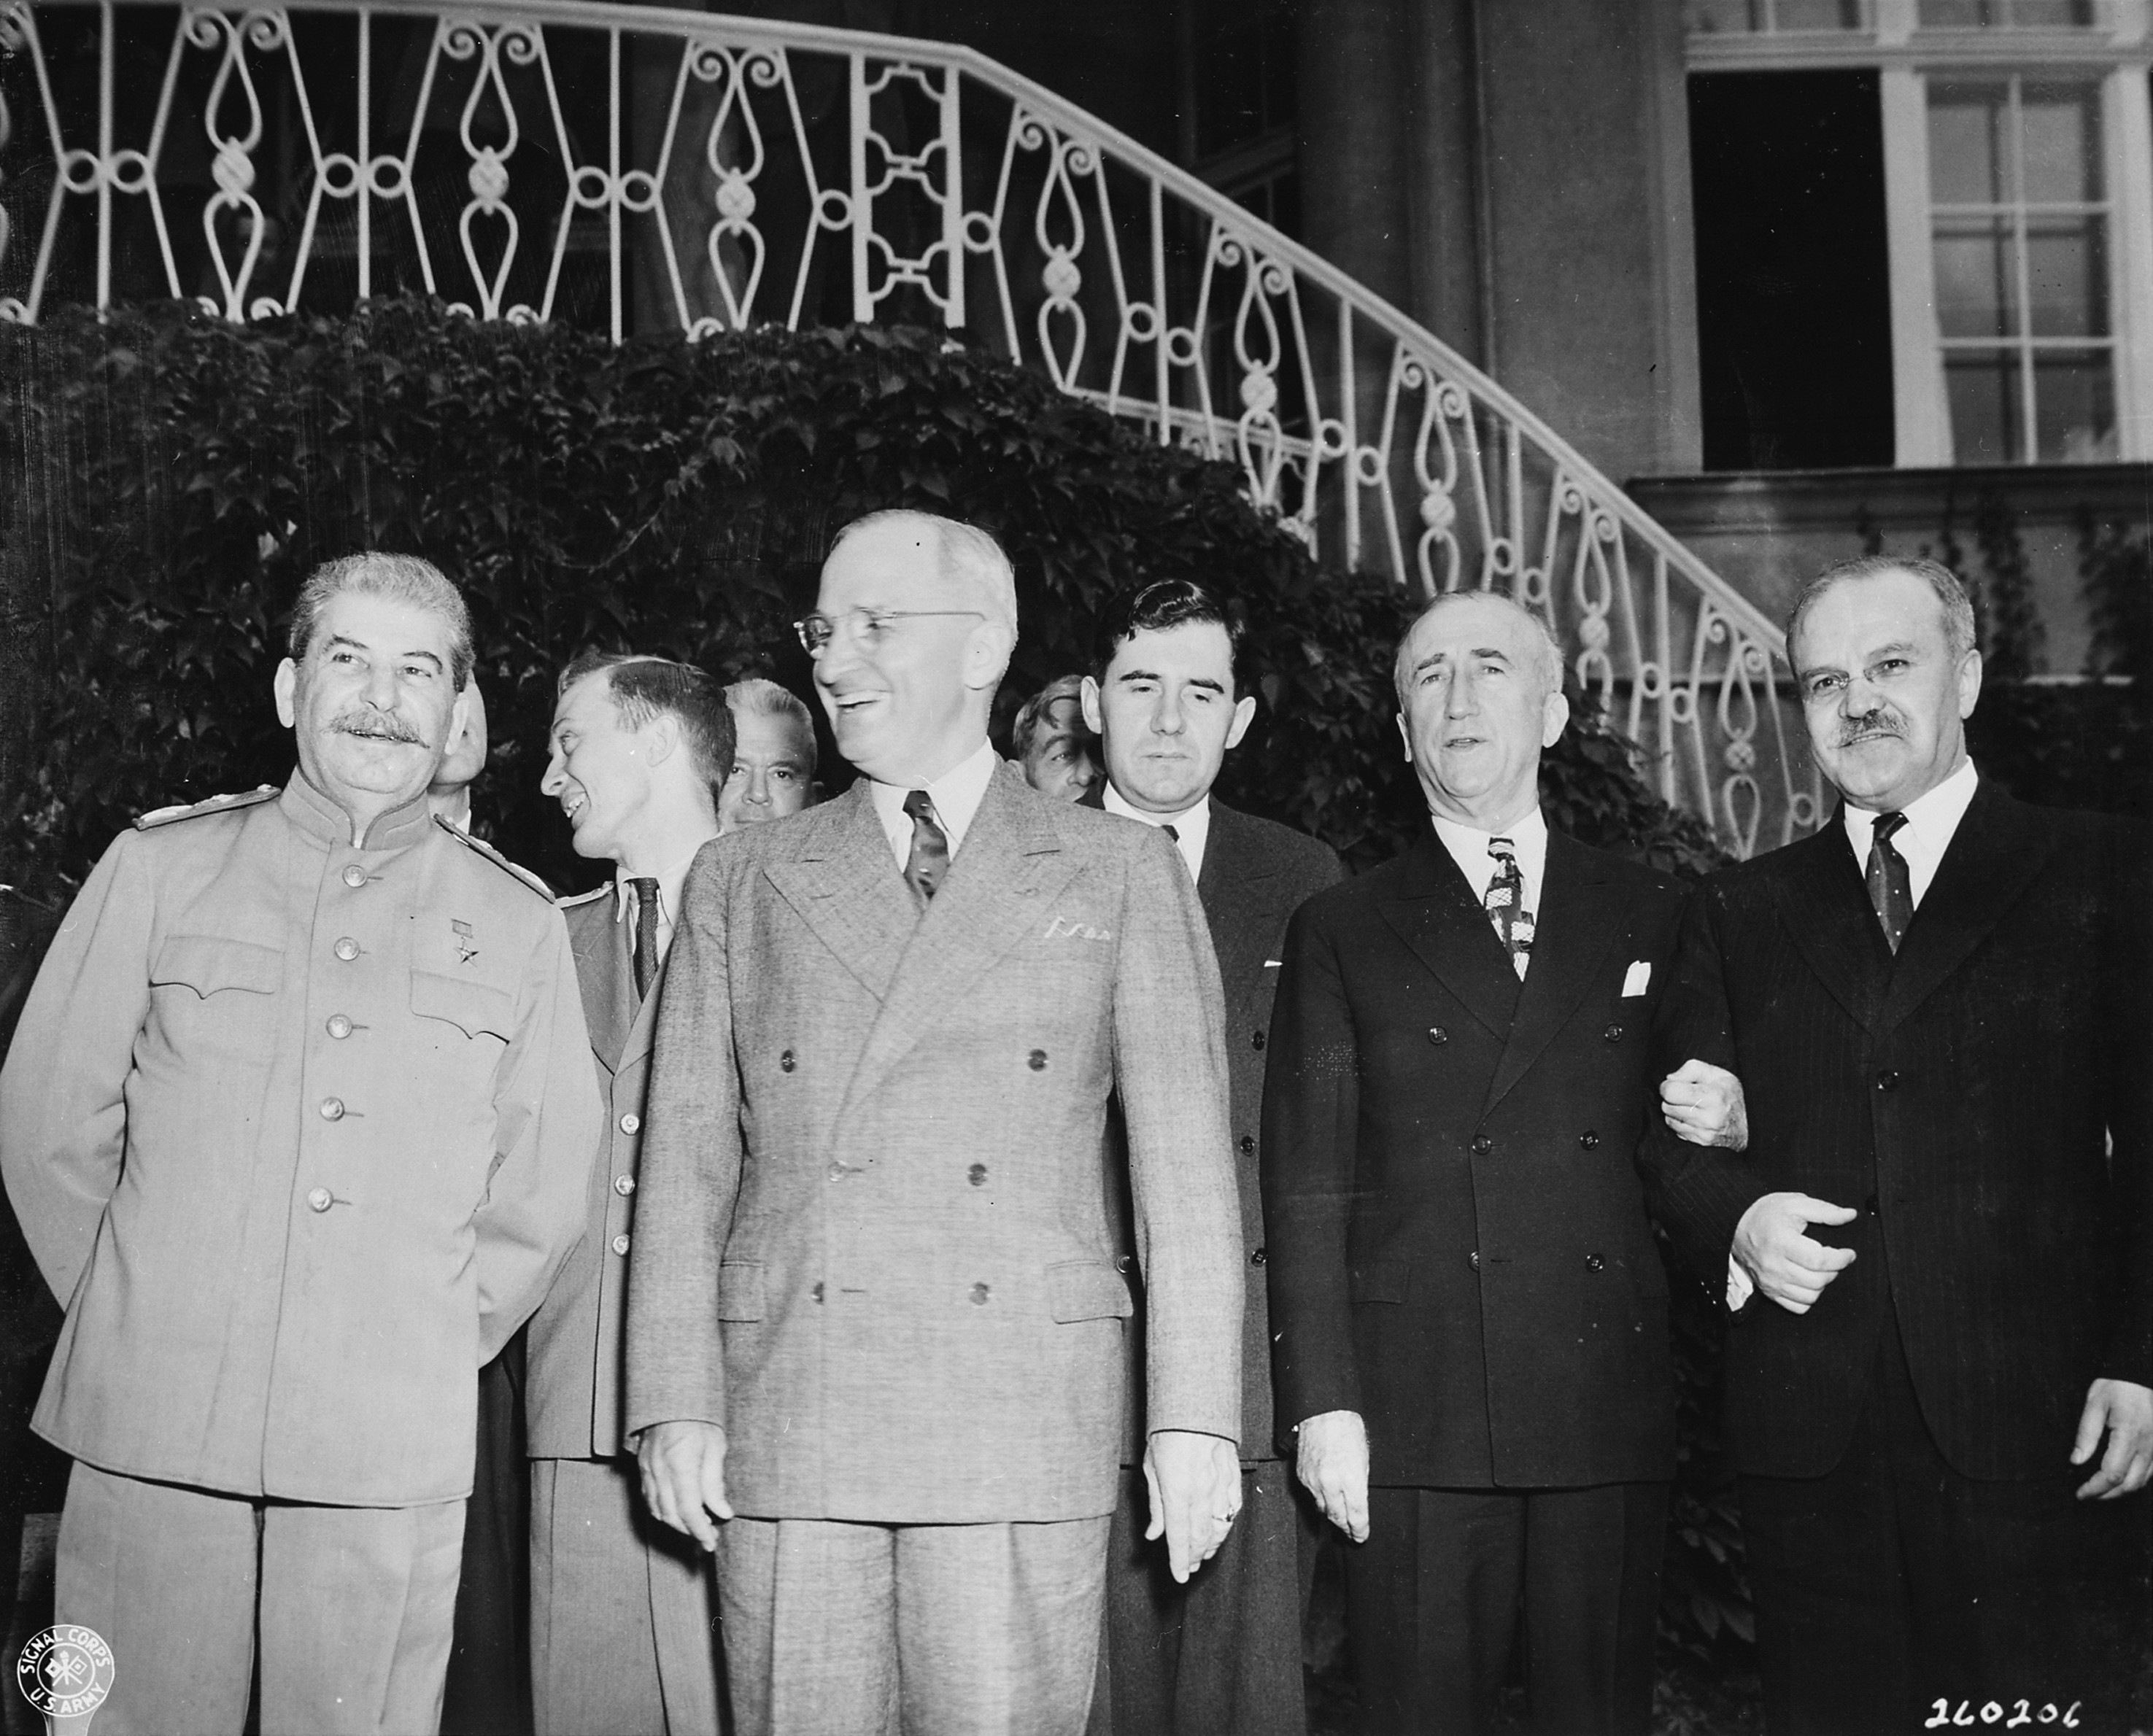 Joseph Stalin, Harry Truman, James Byrnes, and Vyacheslav Molotov at Stalin's residence during the Potsdam Conference, 18 Jul 1945, photo 1 of 2